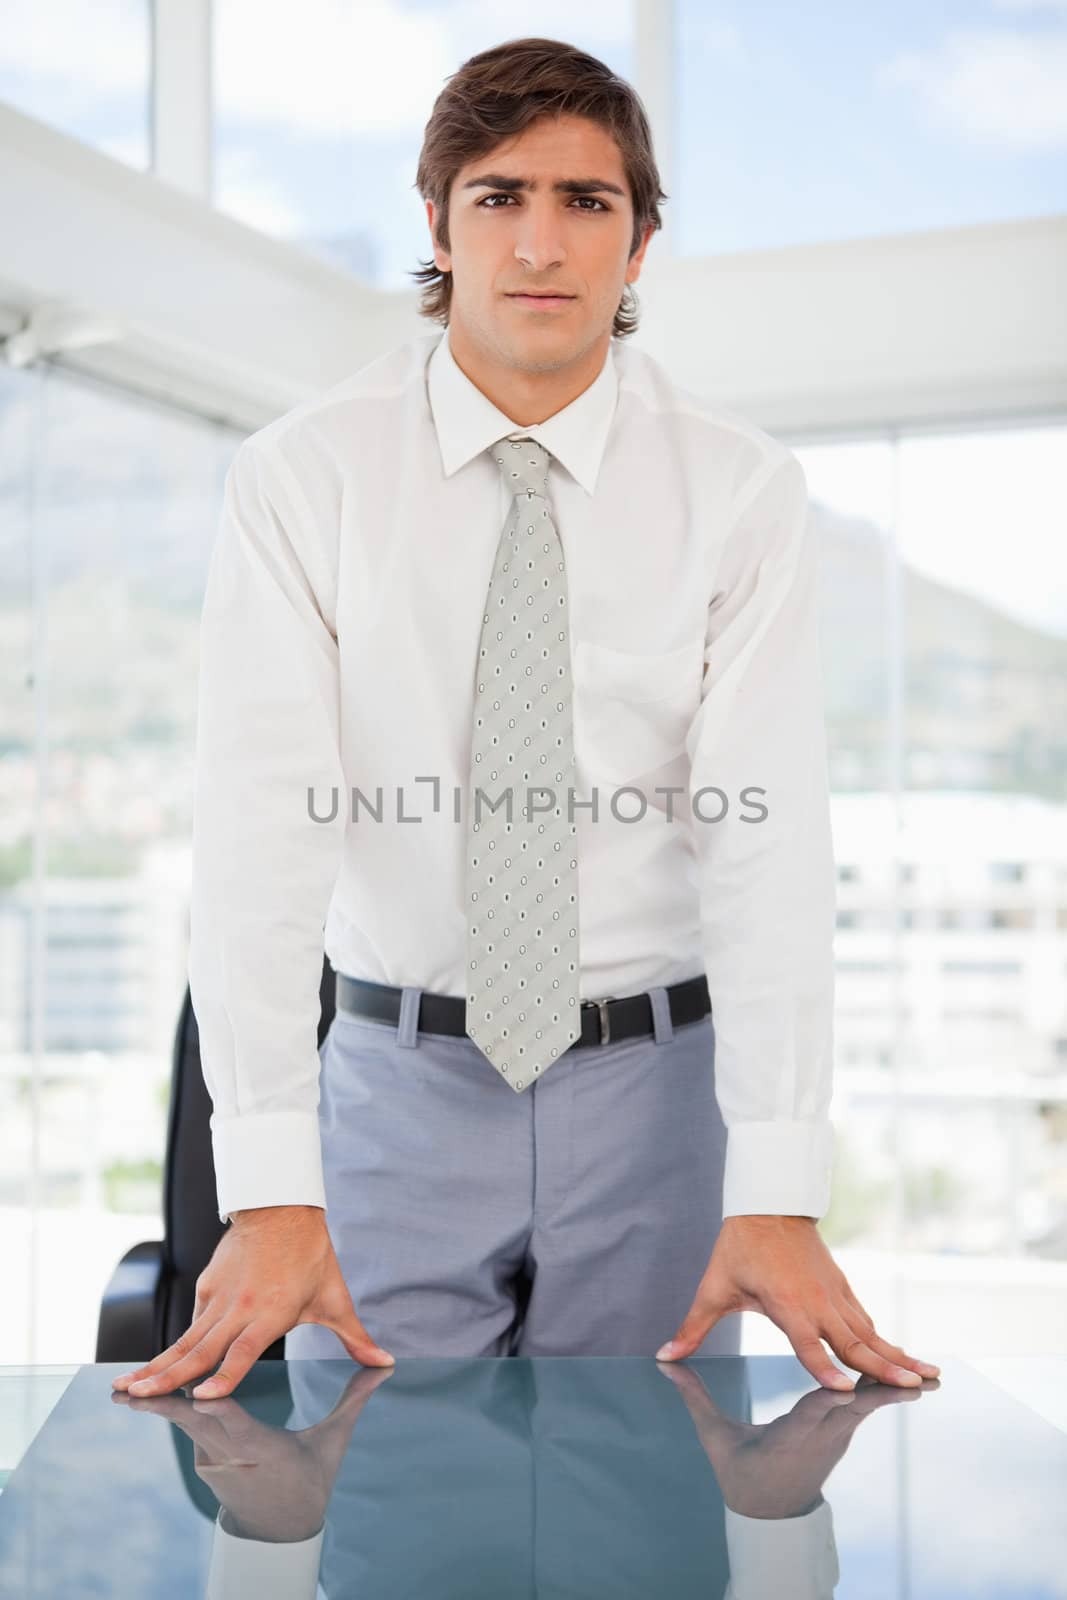 A serious businessman is leaning on a table